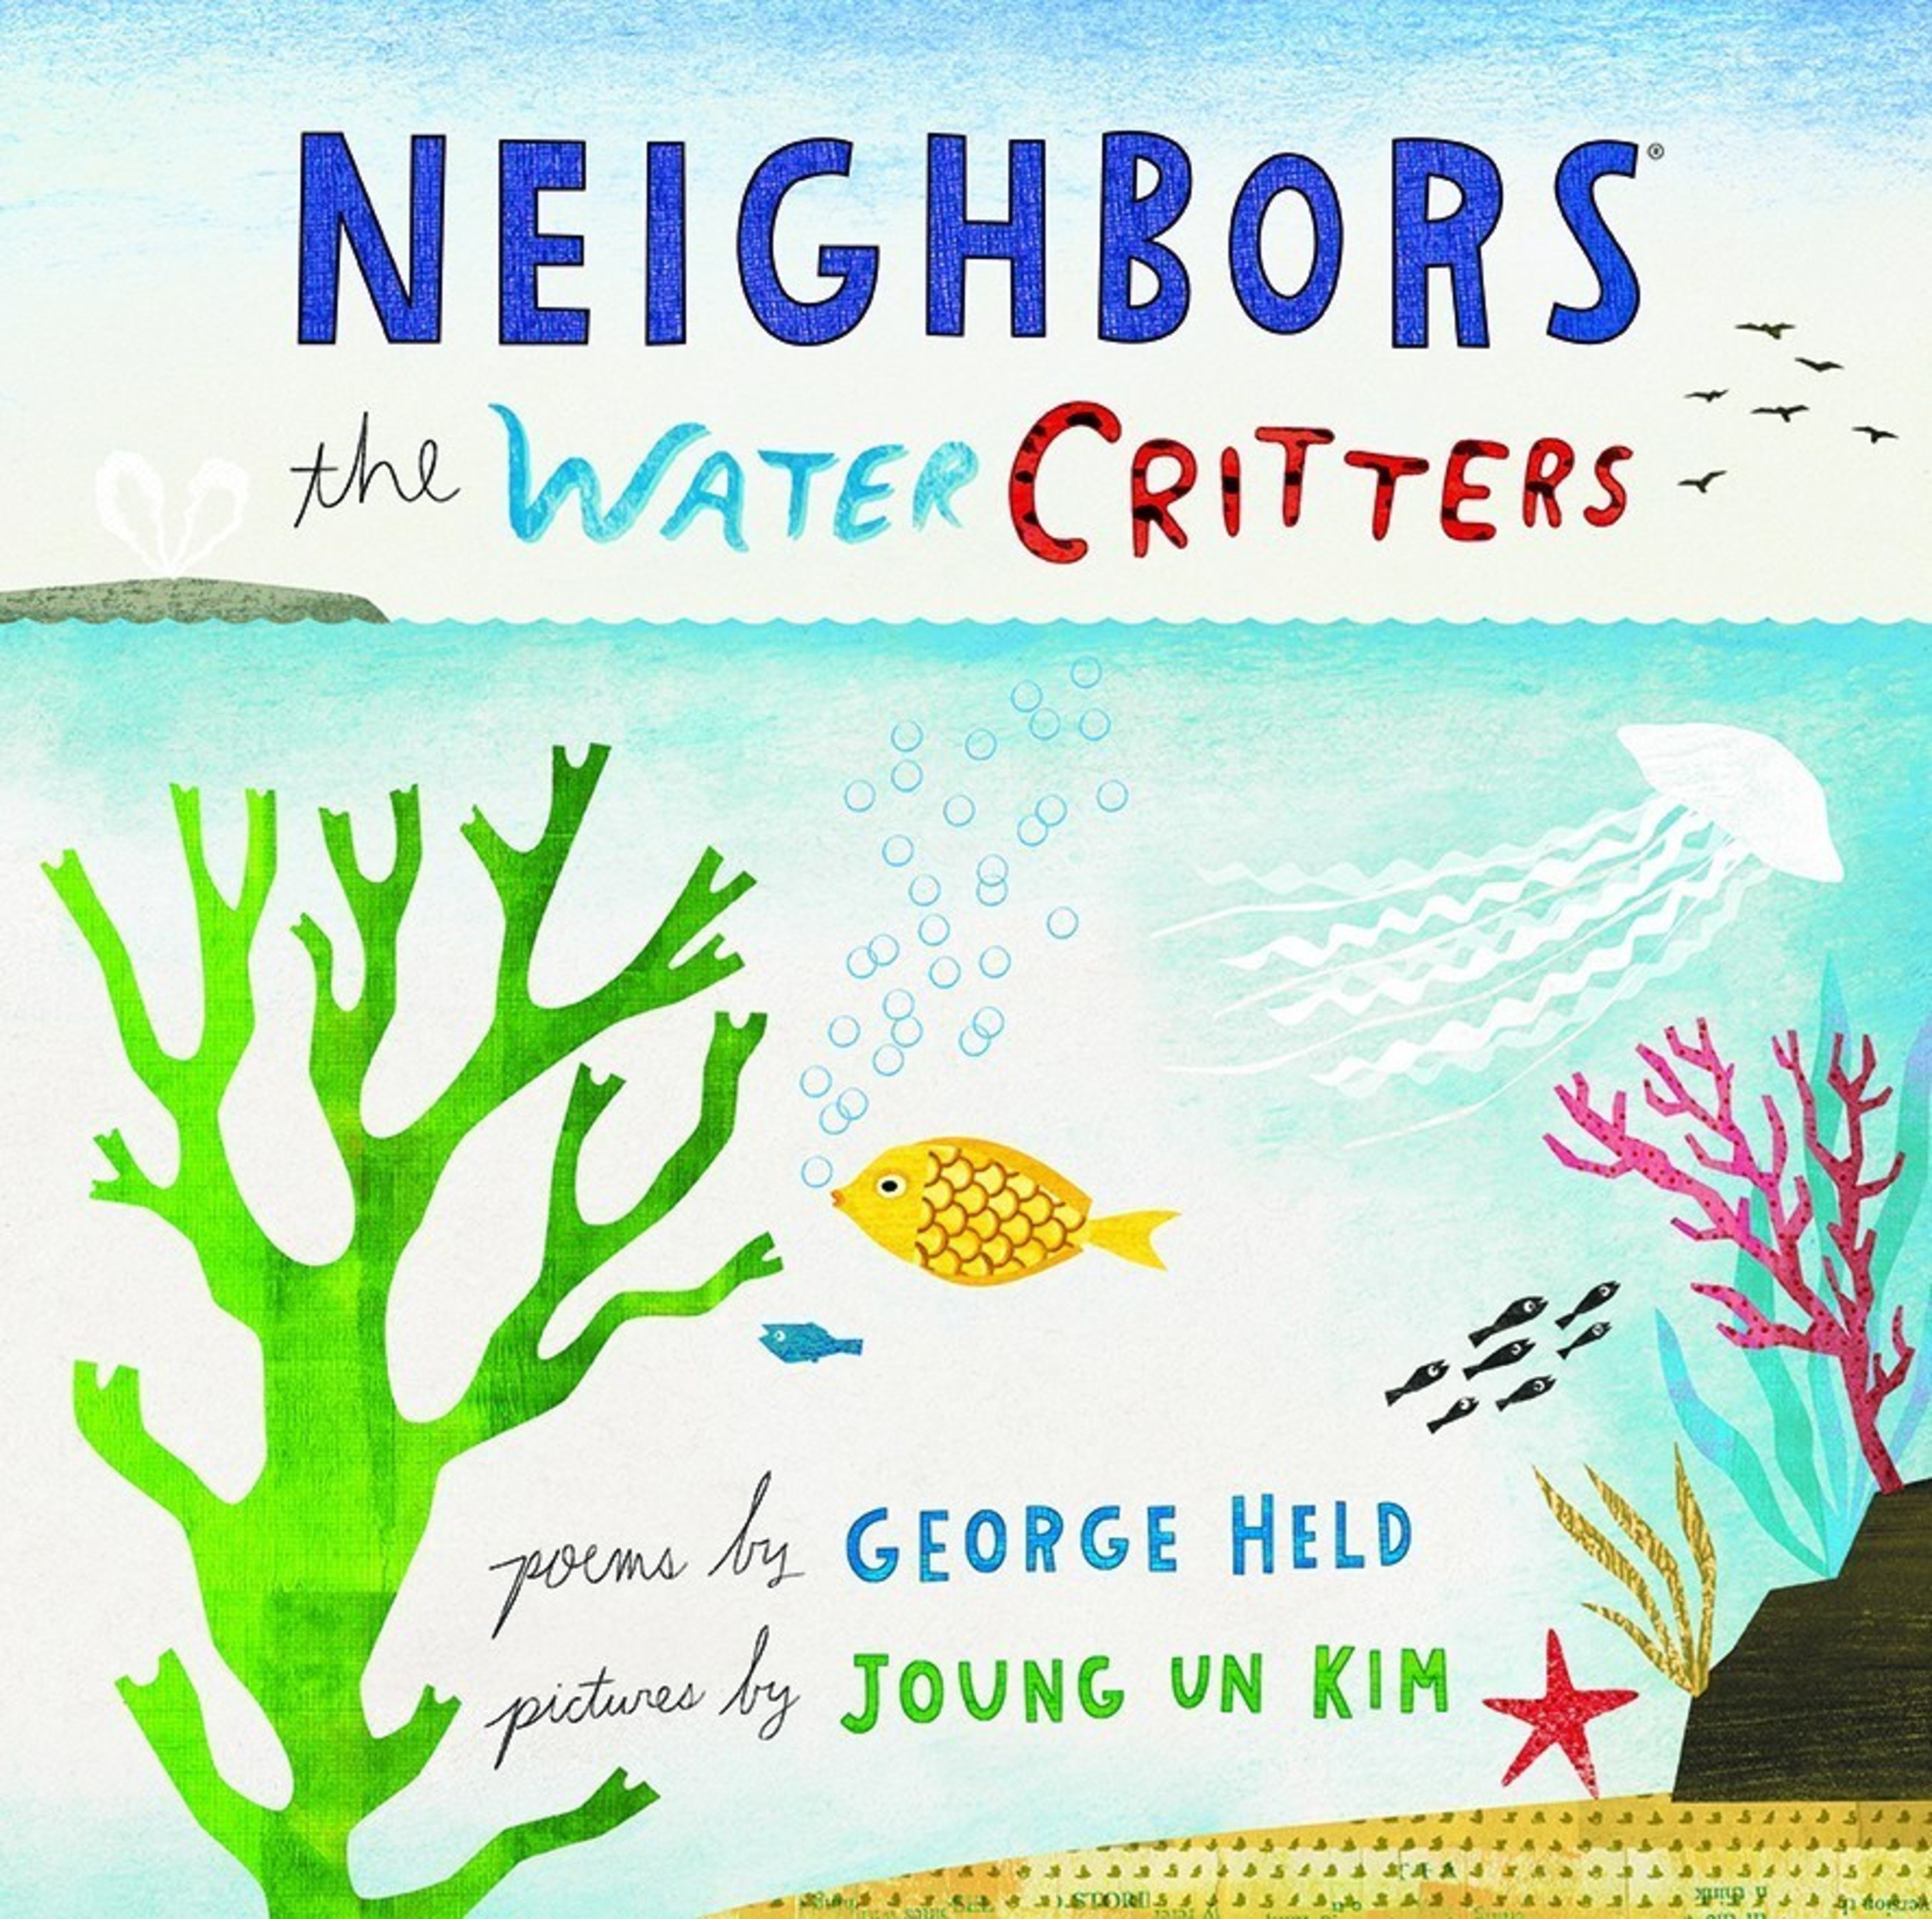 Cover of new 12" x 12" picture book by poet George Held and children's artist Joung Un Kim, released January 14, 2015.